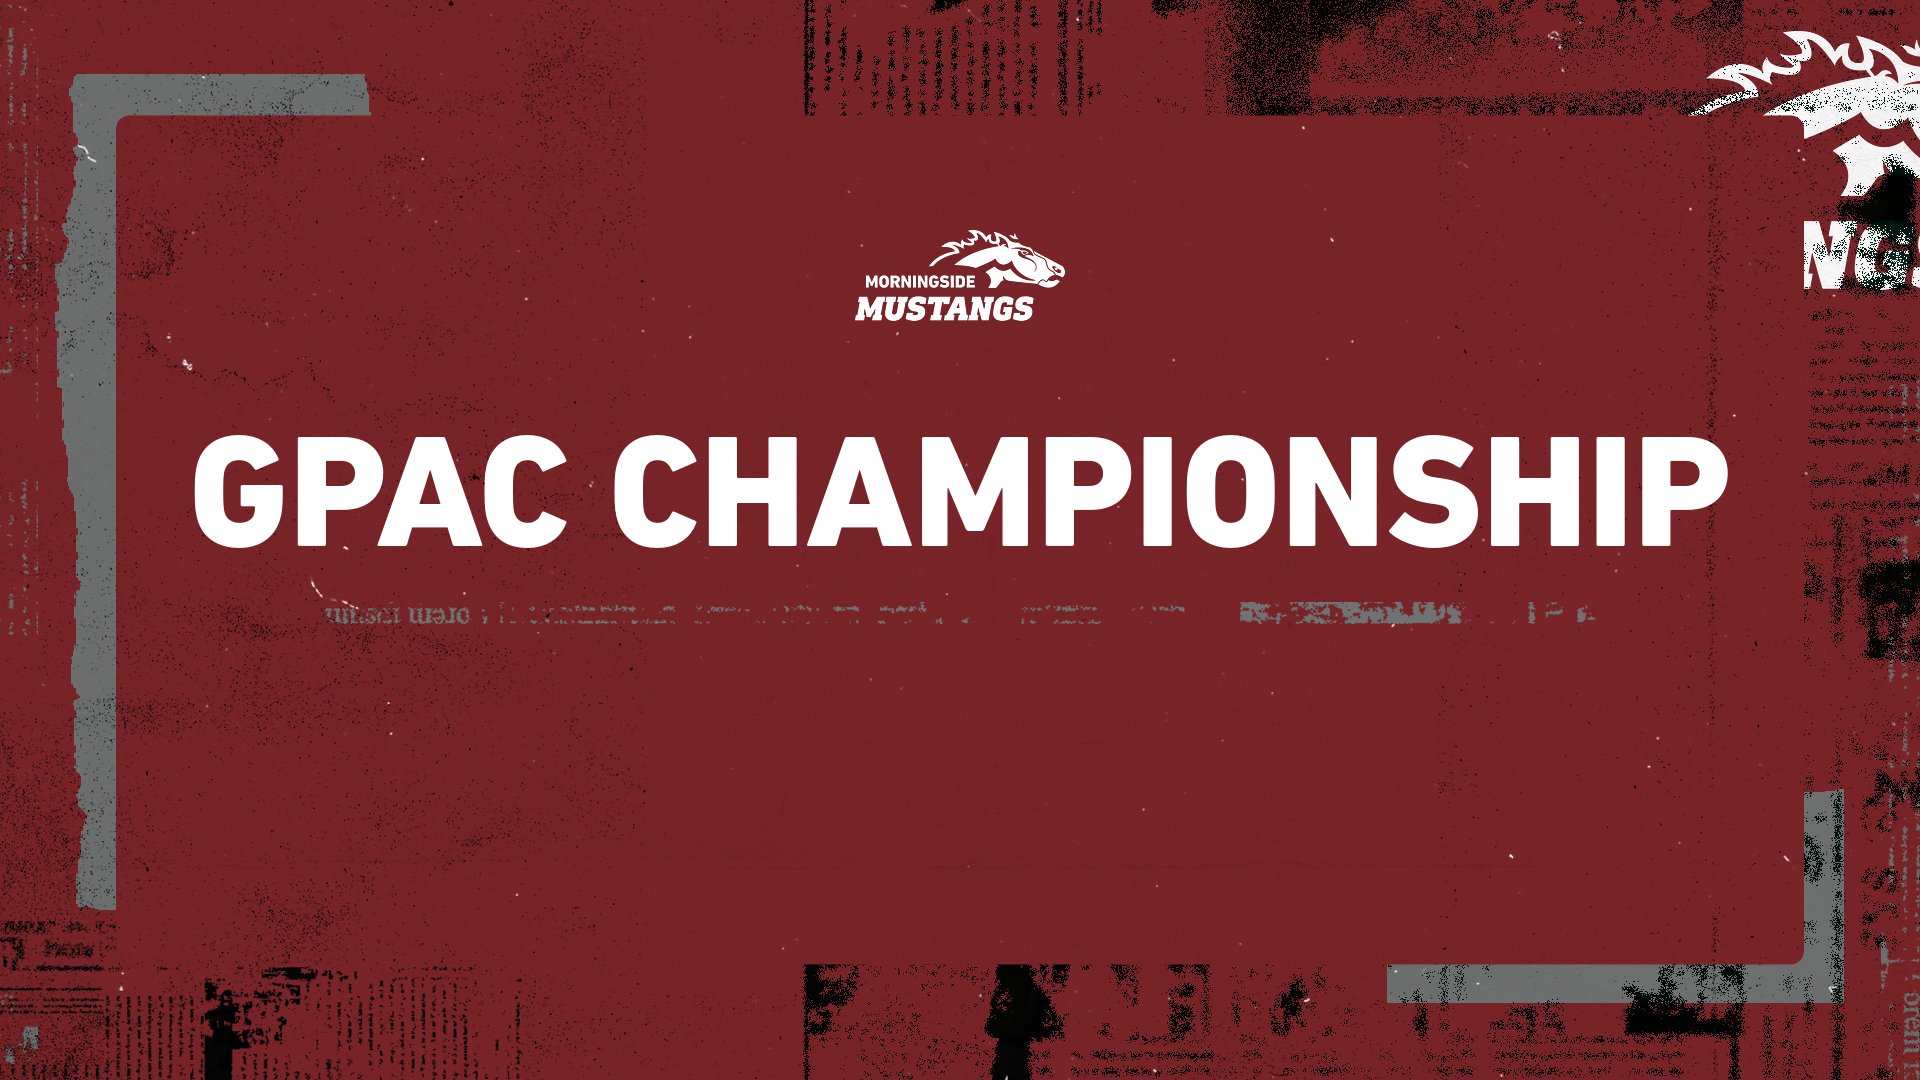 Morningside places second at GPAC Championship